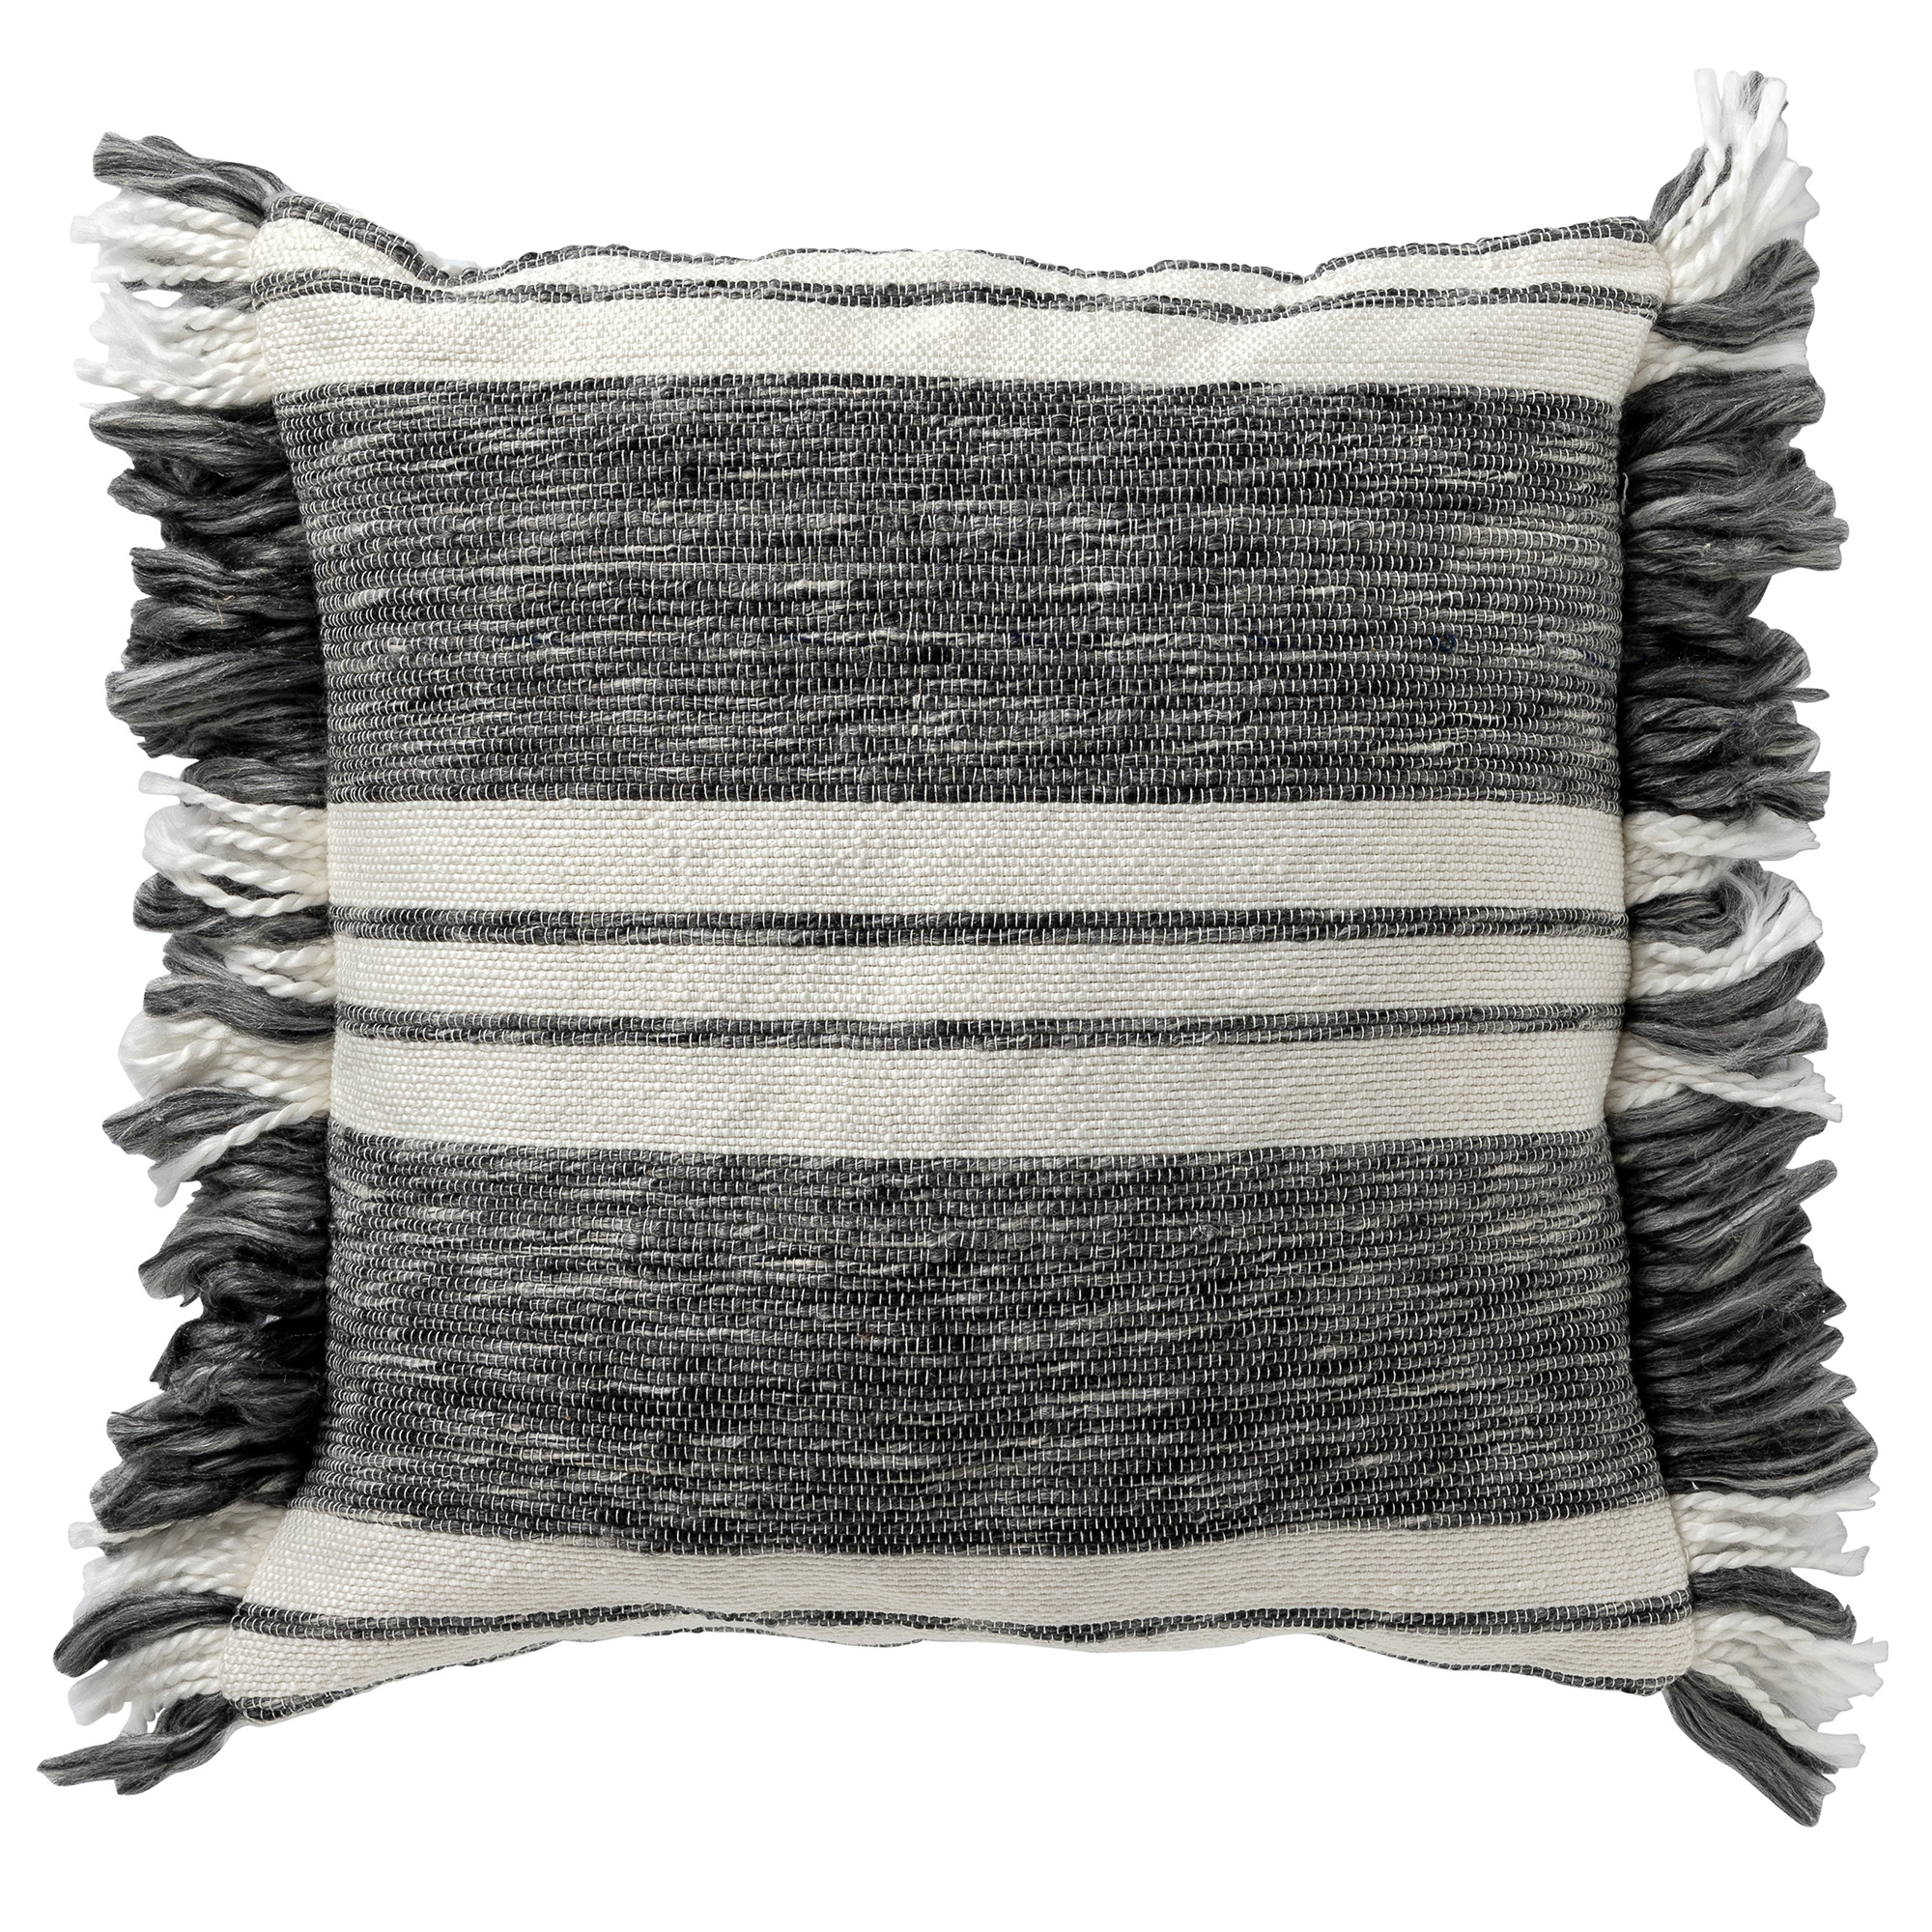 EDGAR - Kussenhoes van 85% gerecycled polyester - streepdessin - Eco Line collectie 40x60 cm - Charcoal Gray - antraciet